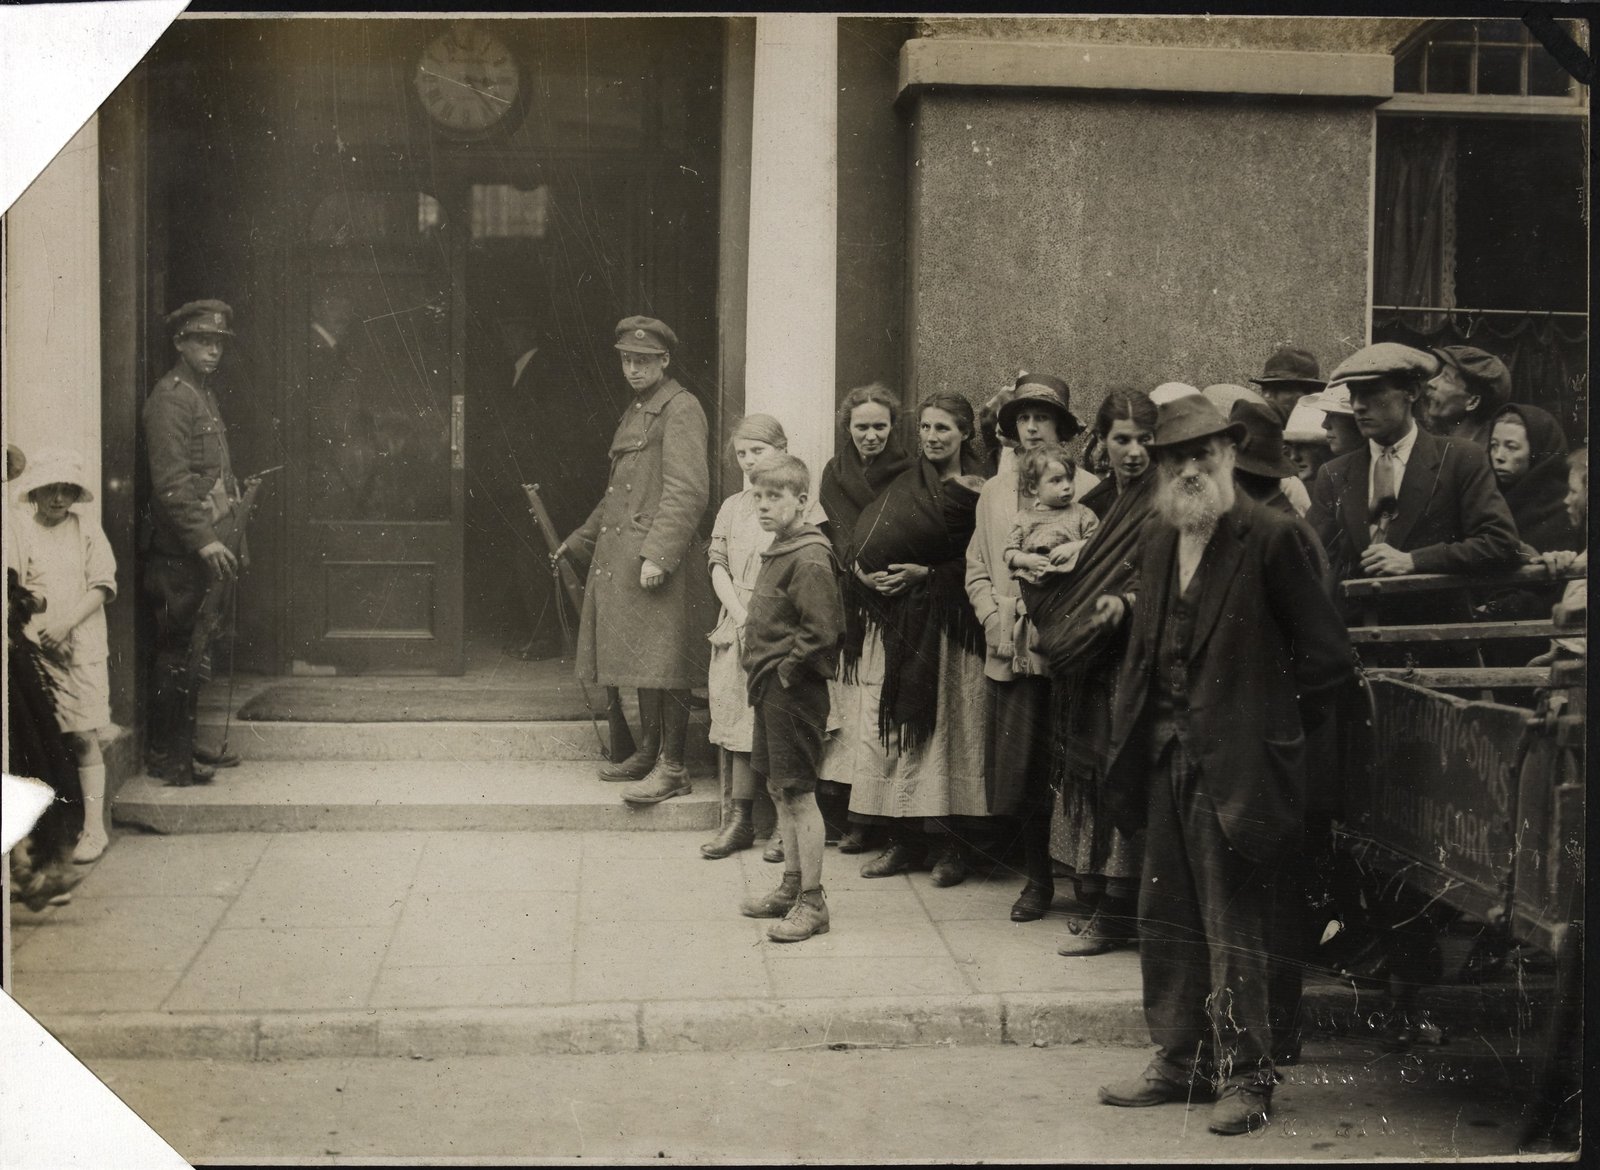 Image - Group of people outside the National Army headquaters in Cork city, the Imperial Hotel. Image courtesy of the National Library of Ireland